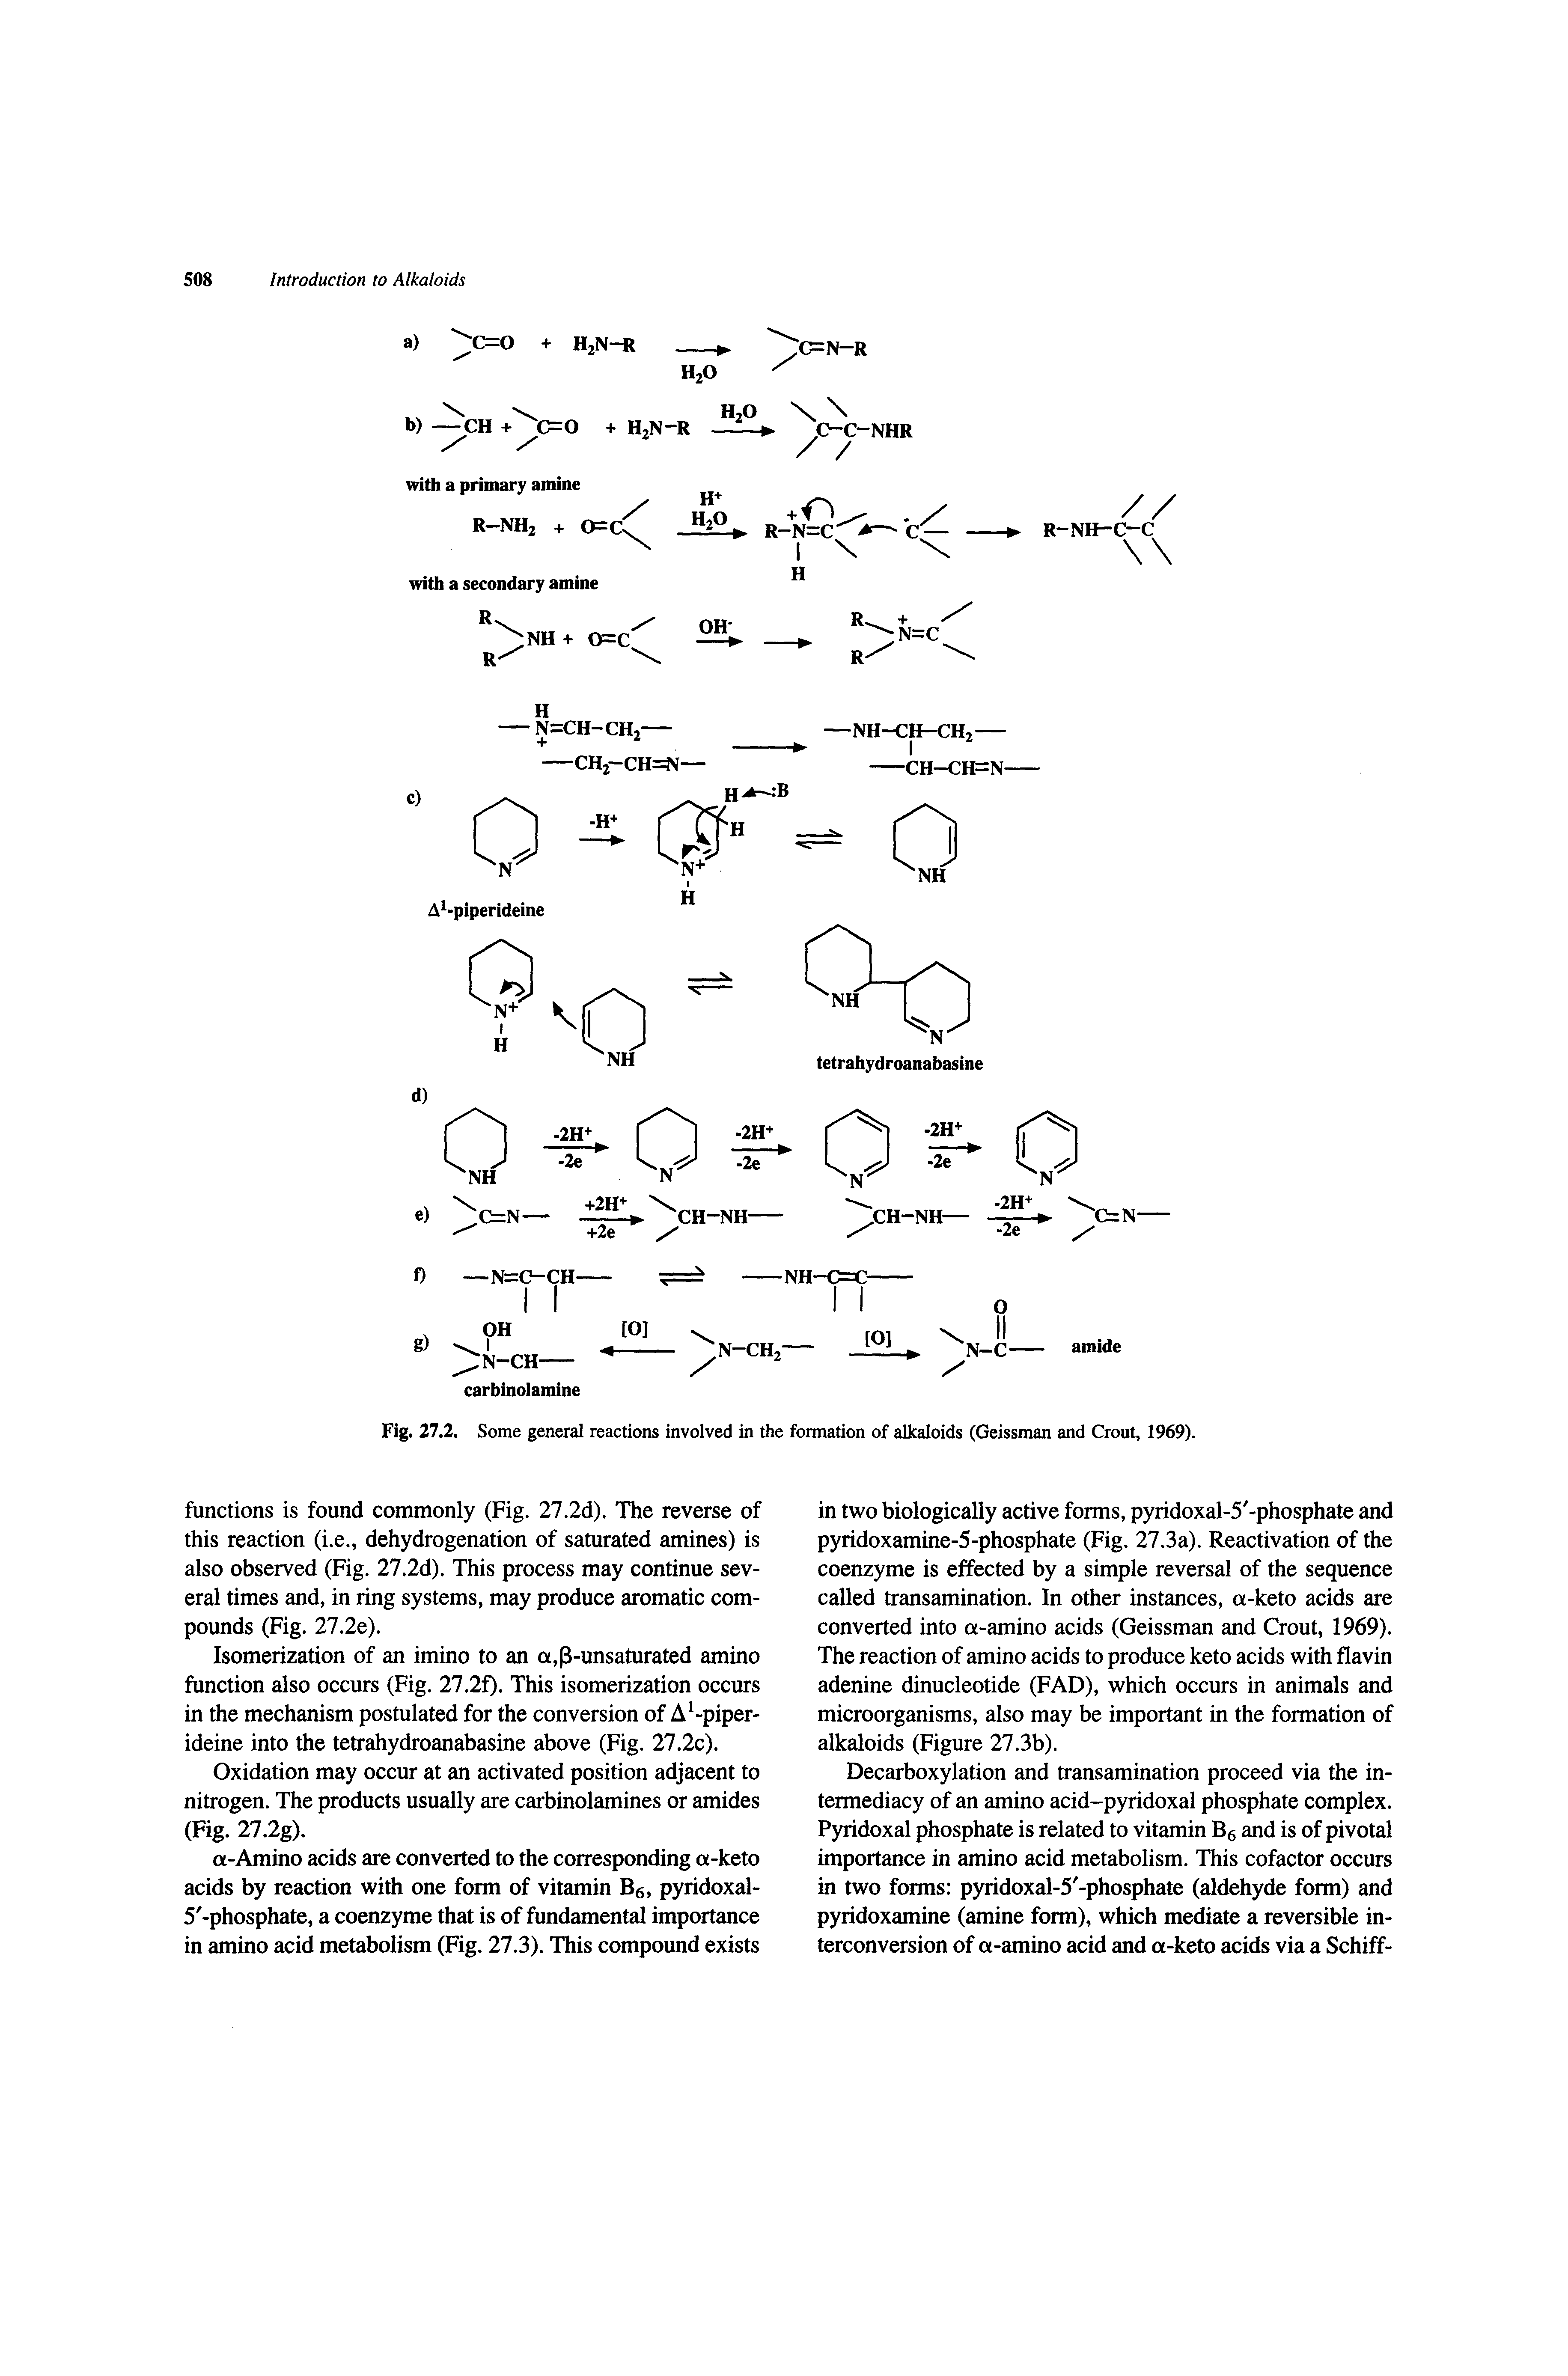 Fig. 27.2. Some general reactions involved in the formation of alkaloids (Geissman and Grout, 1969).